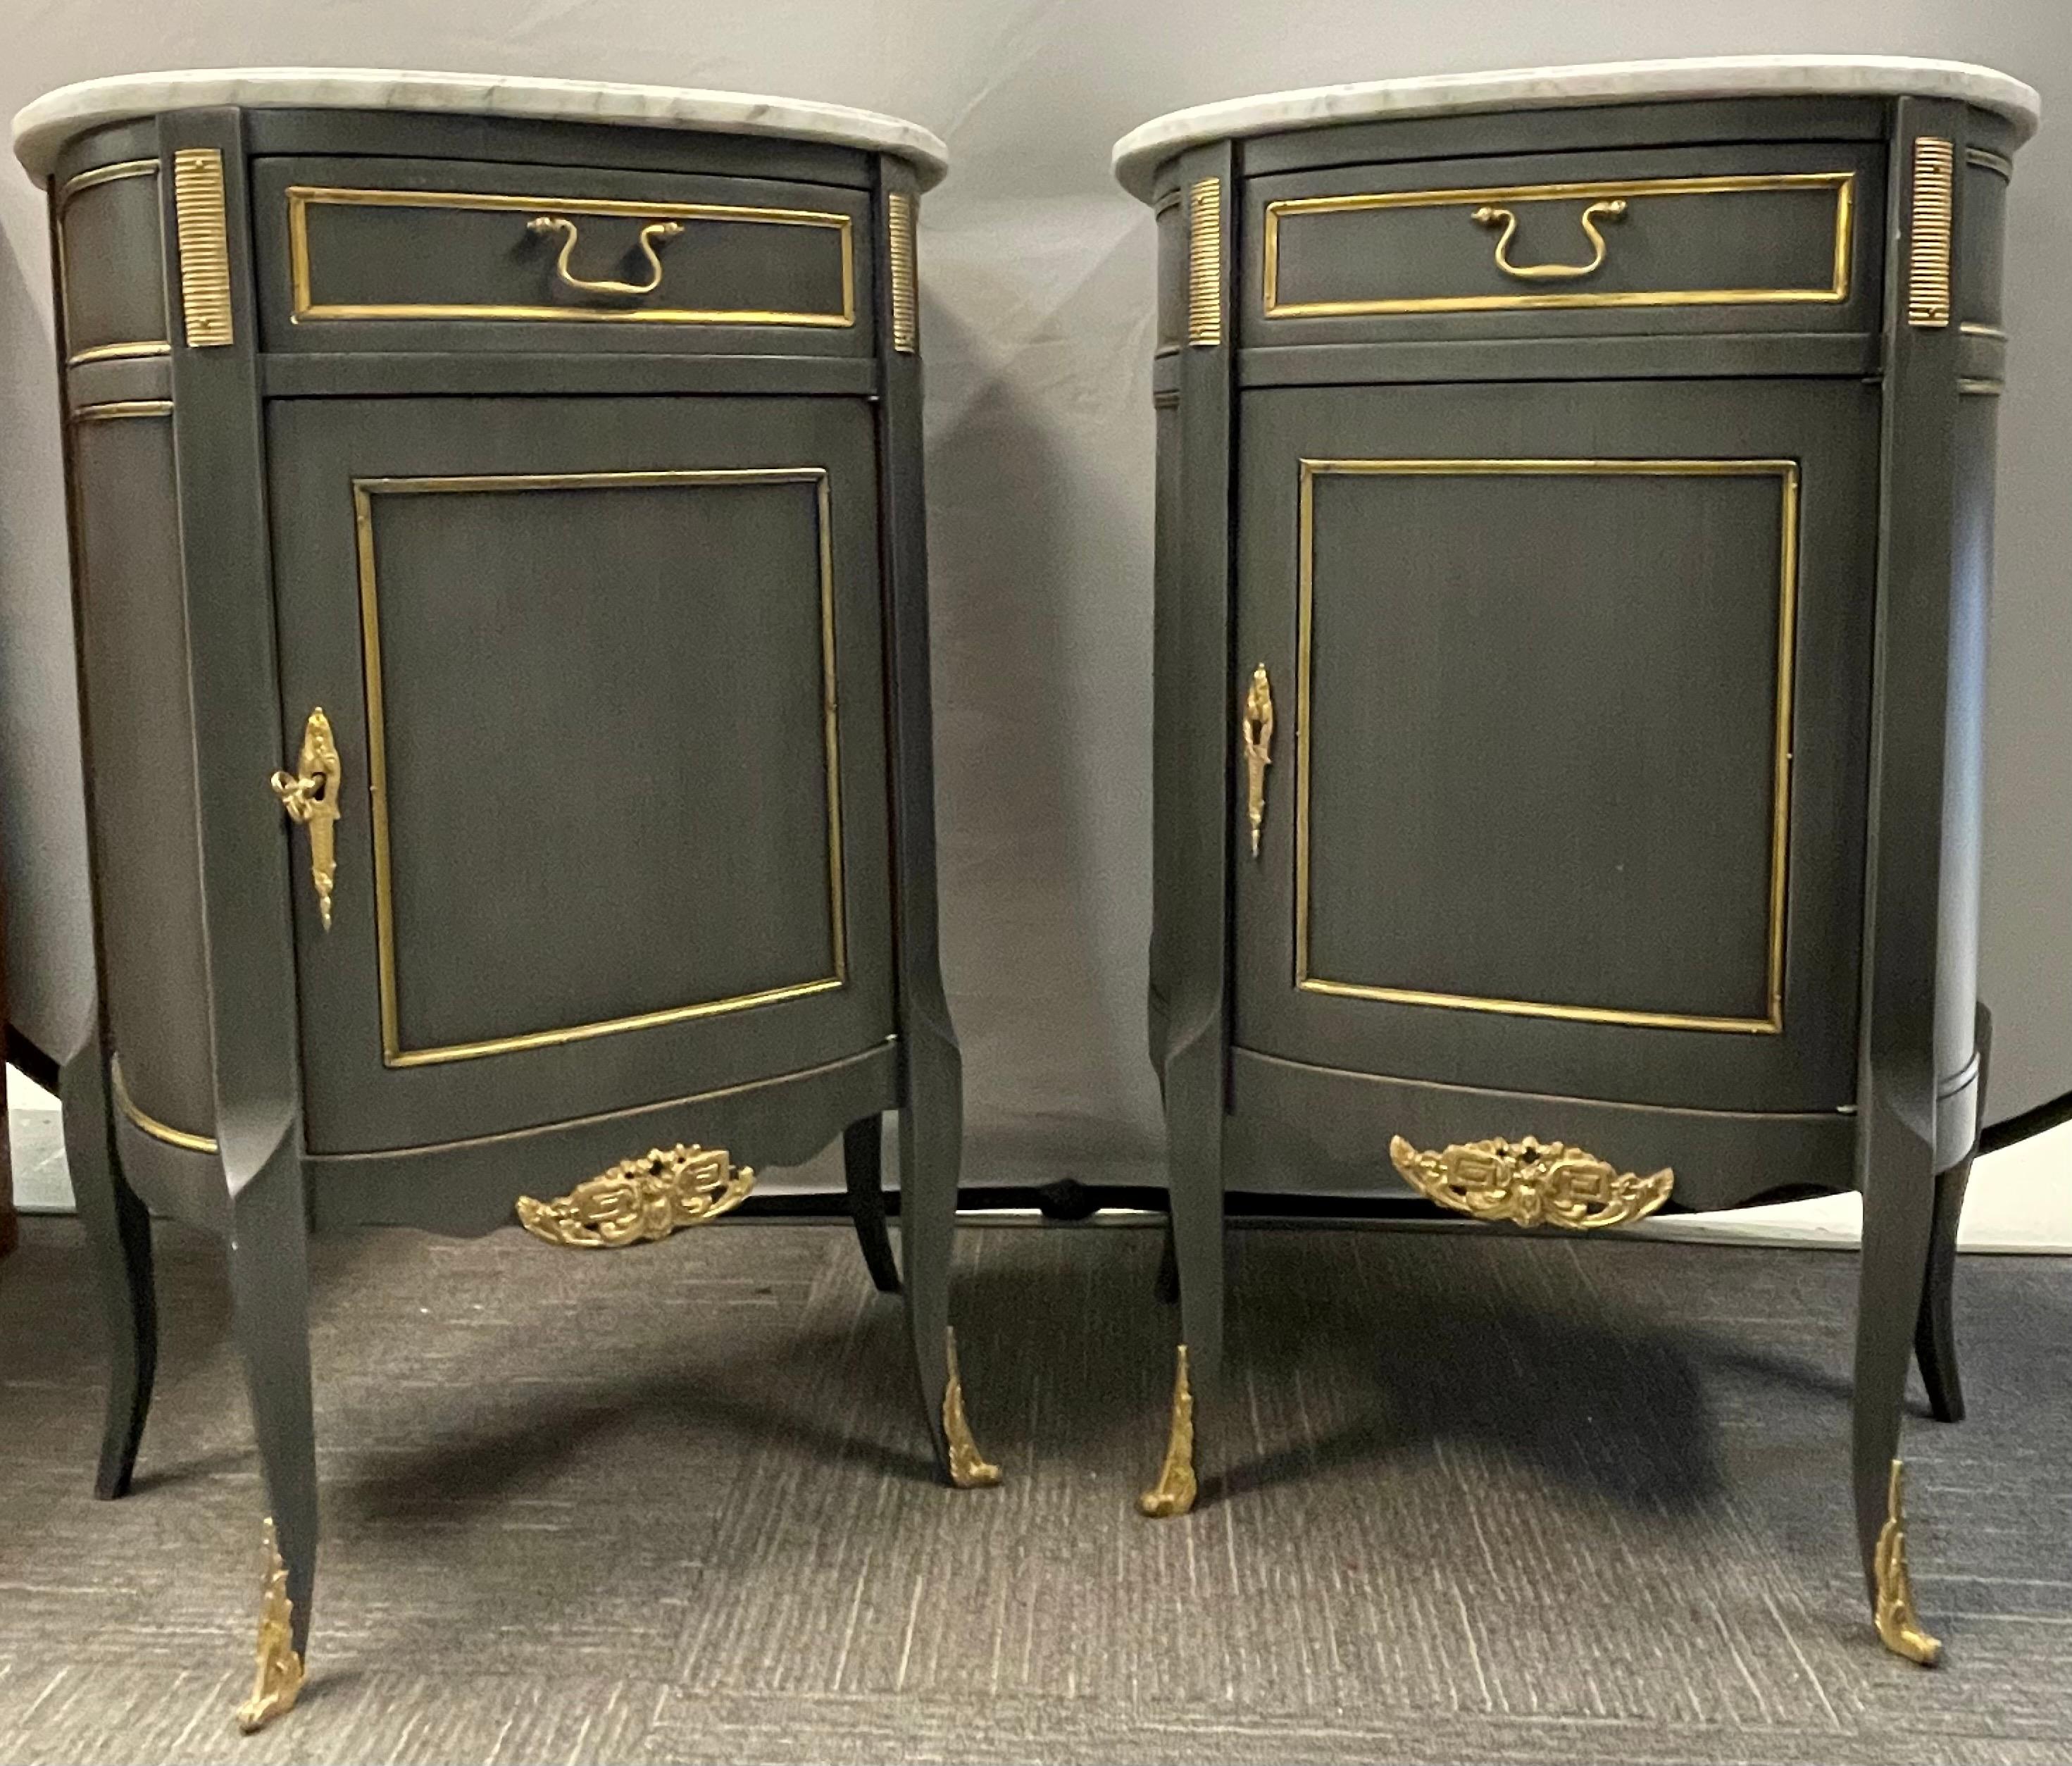 A finely constructed pair of green blue painted marble top Louis XV style nightstands, side tables or/ end tables. Each in the Louis XV style with bronze mounts and marble tops. The demilune painted cabinets with a single shelved door under one